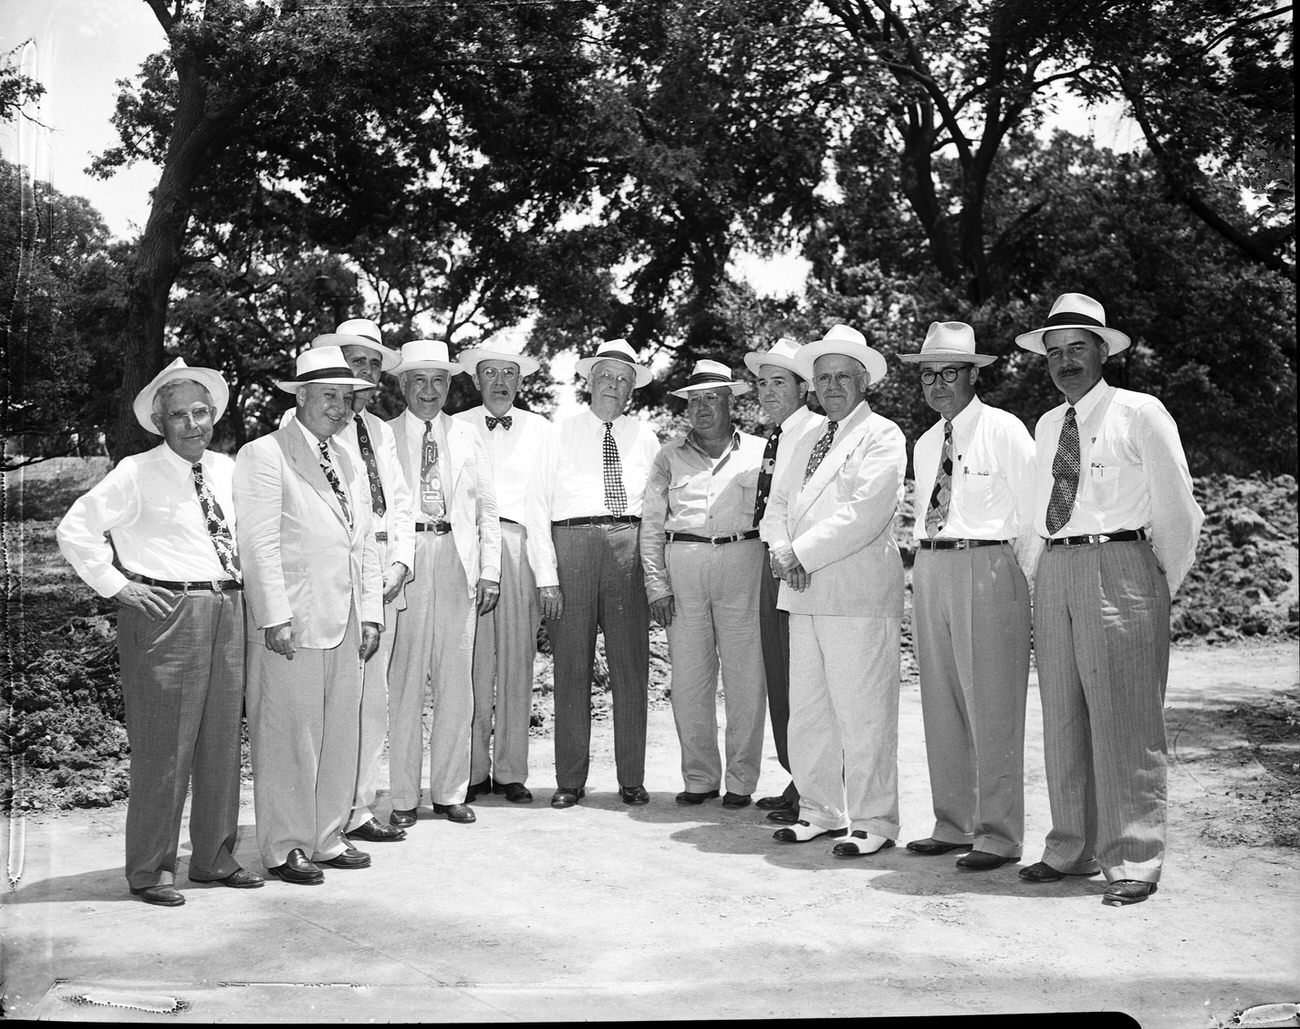 Citizens Flood Control Committee men, along with city and county officials, attending a picnic marking completion of levee repairs.